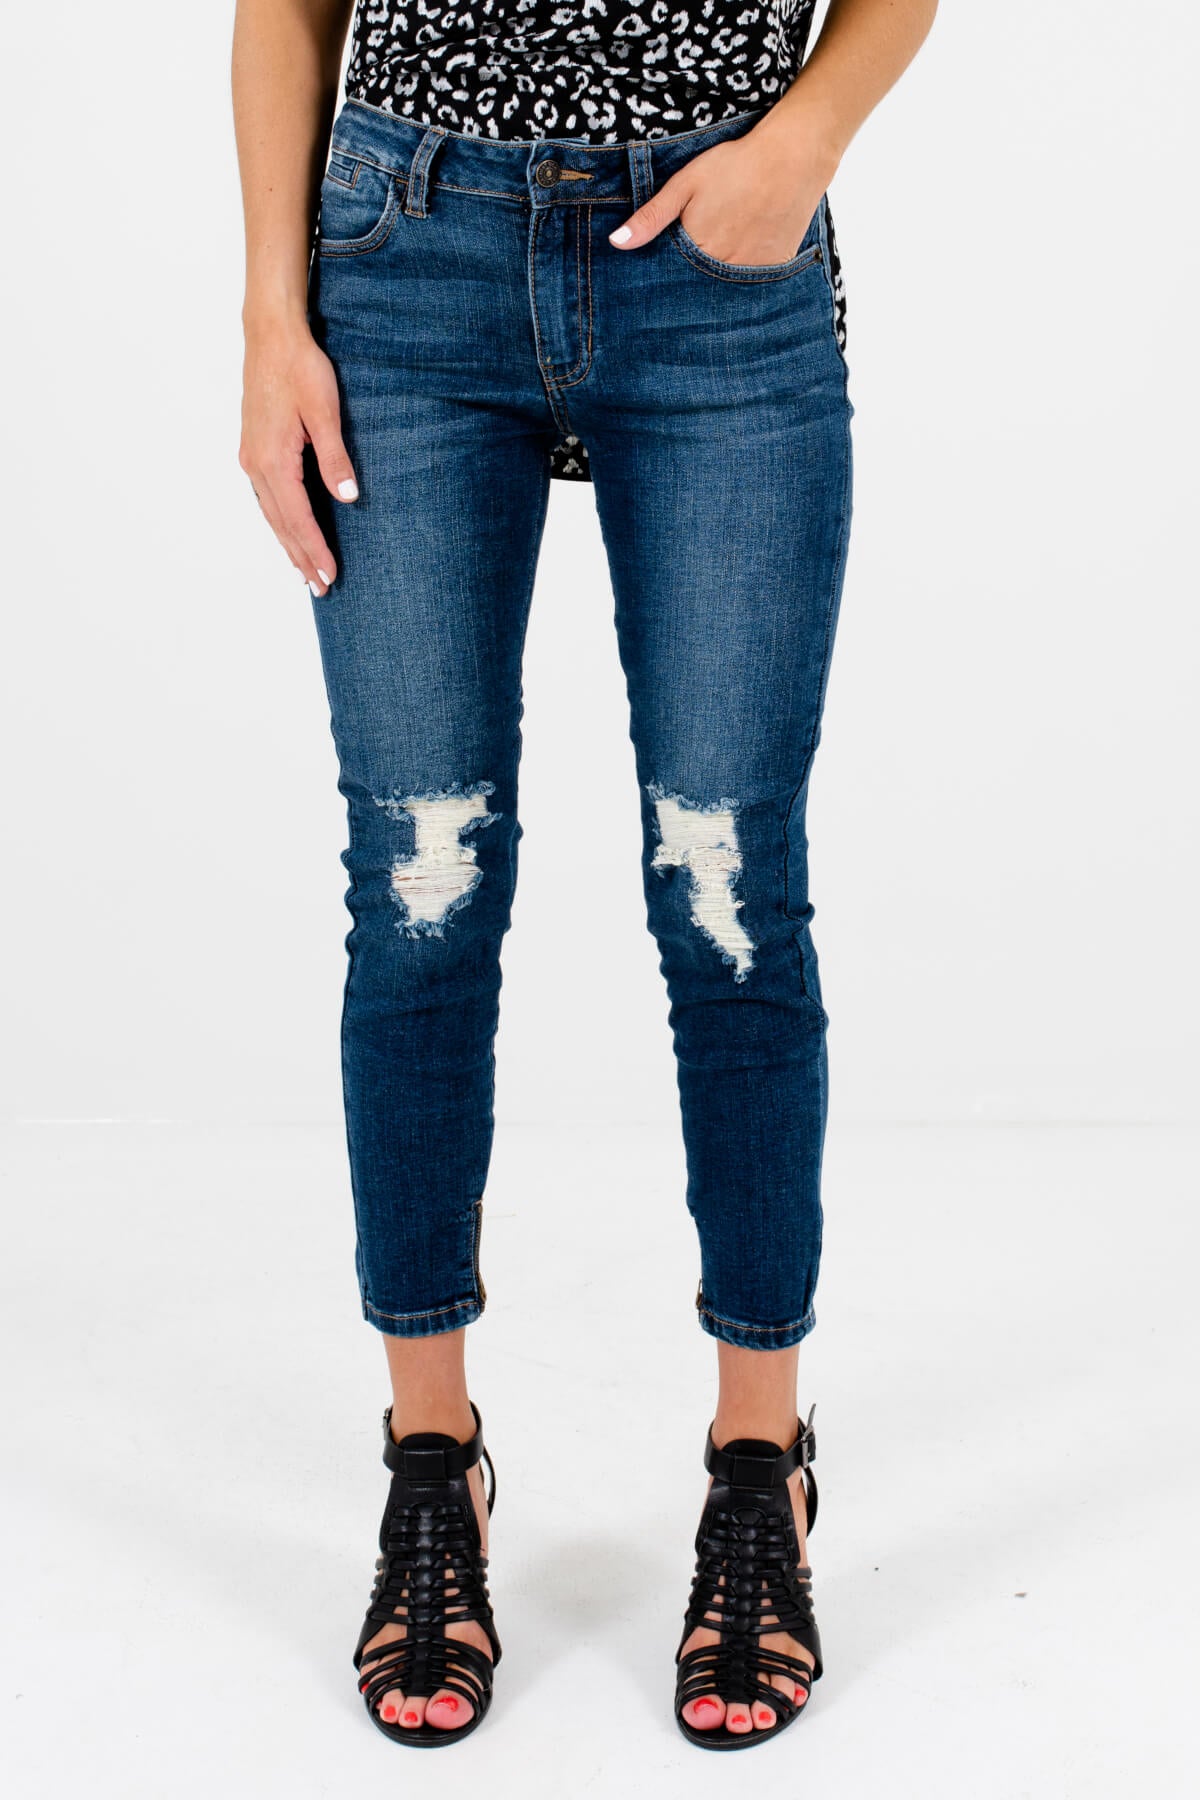 boutique skinny jeans